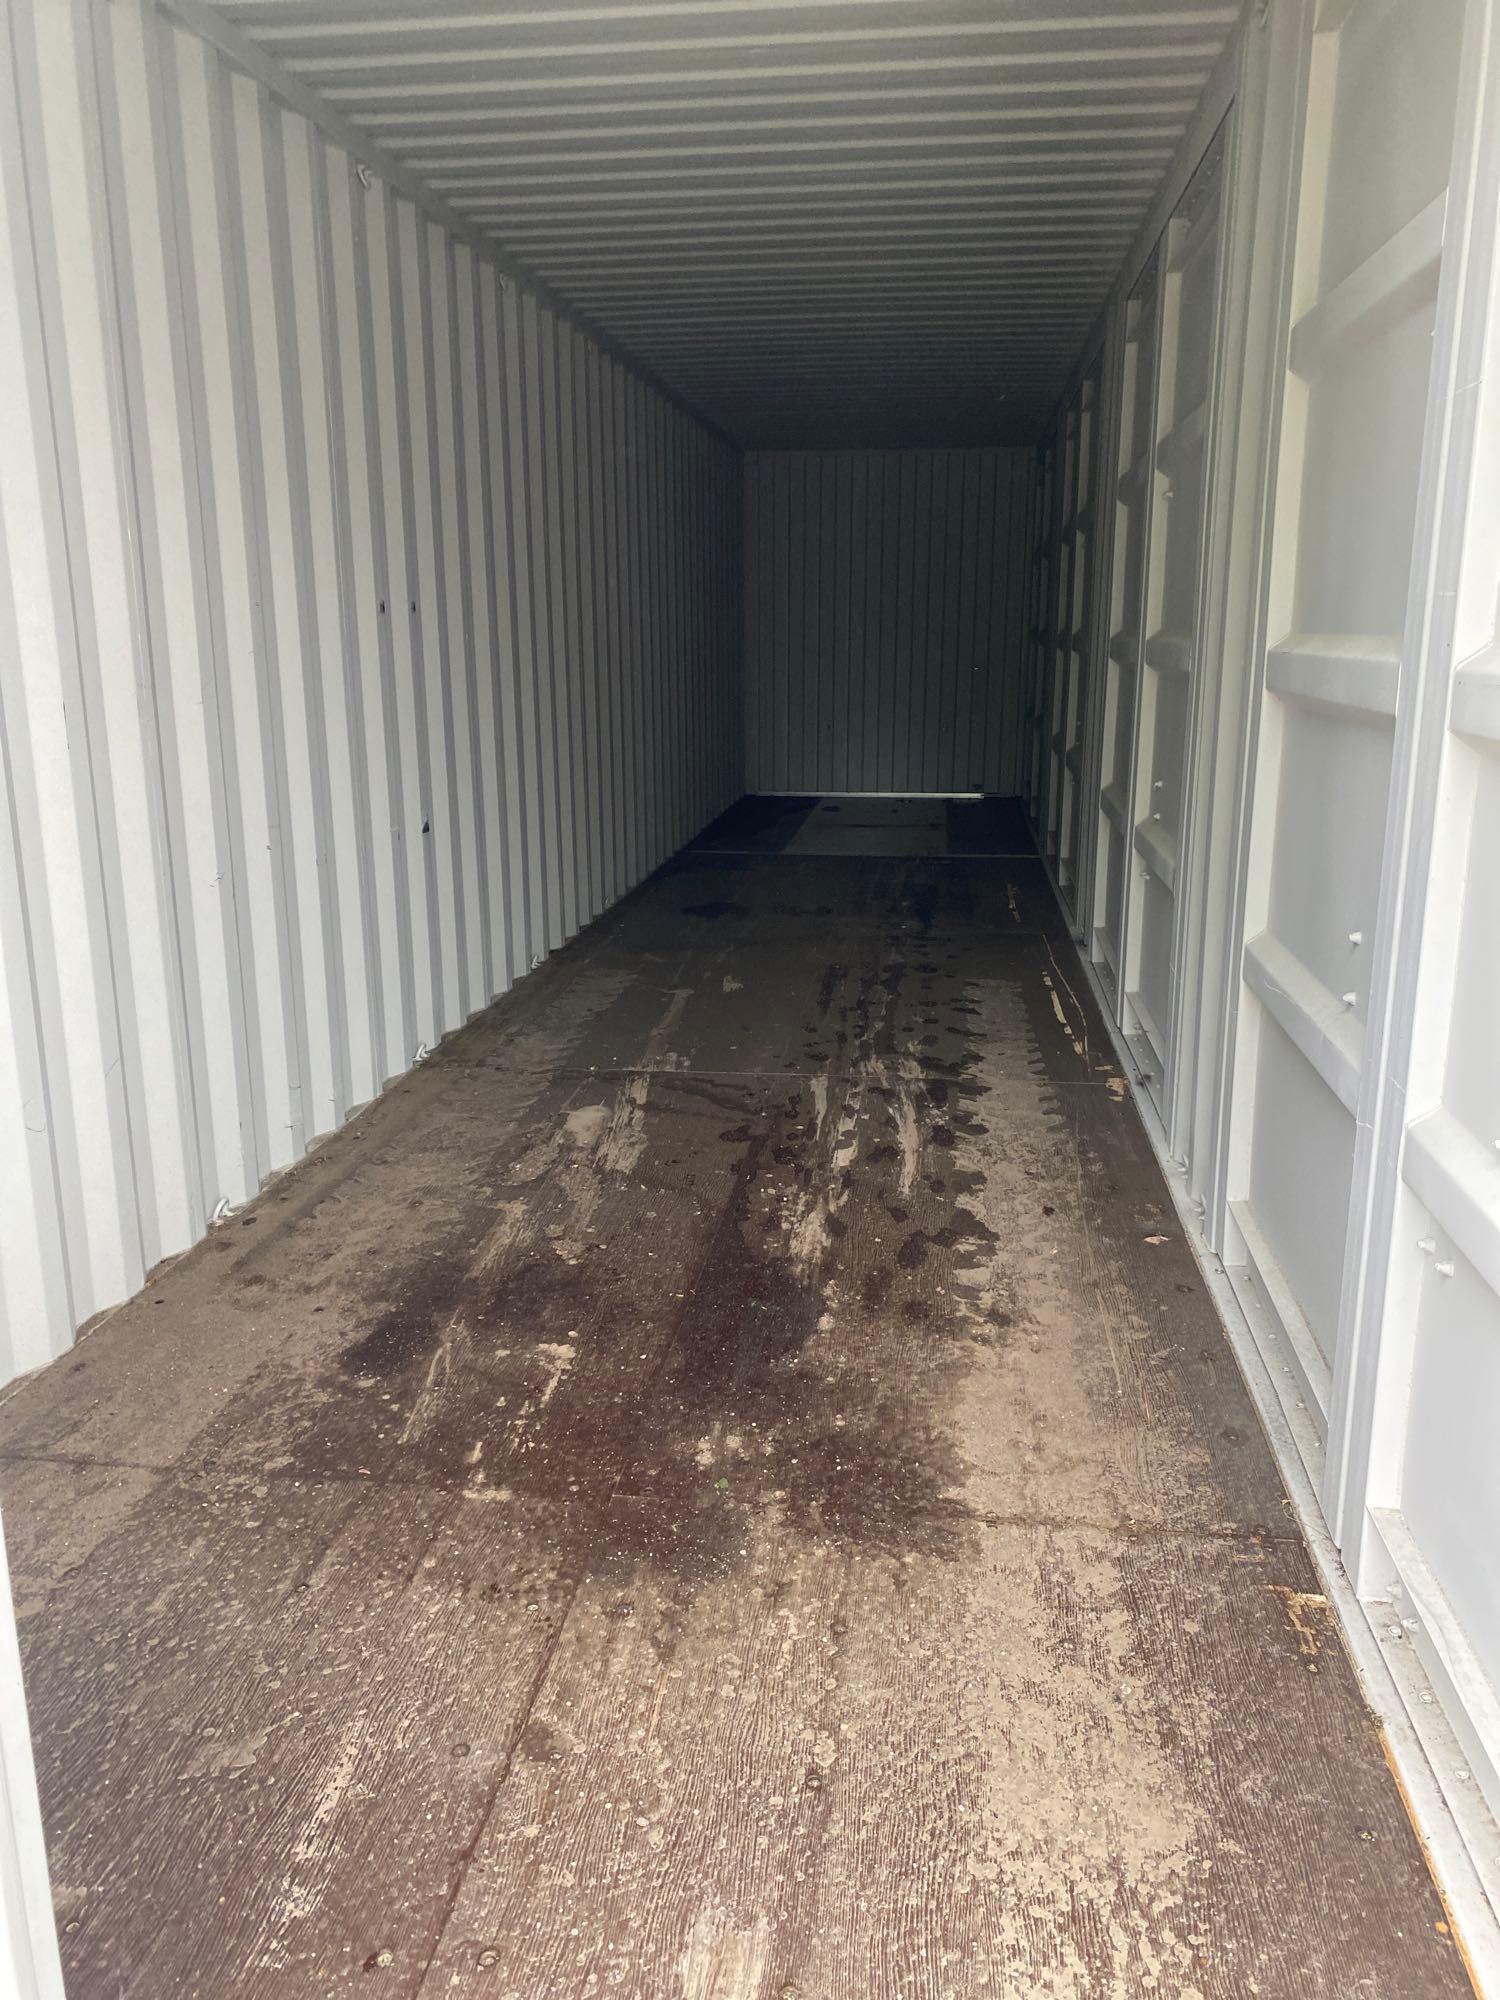 New CIMC 40ft (4 side door) Steel Shipping/Storage Container